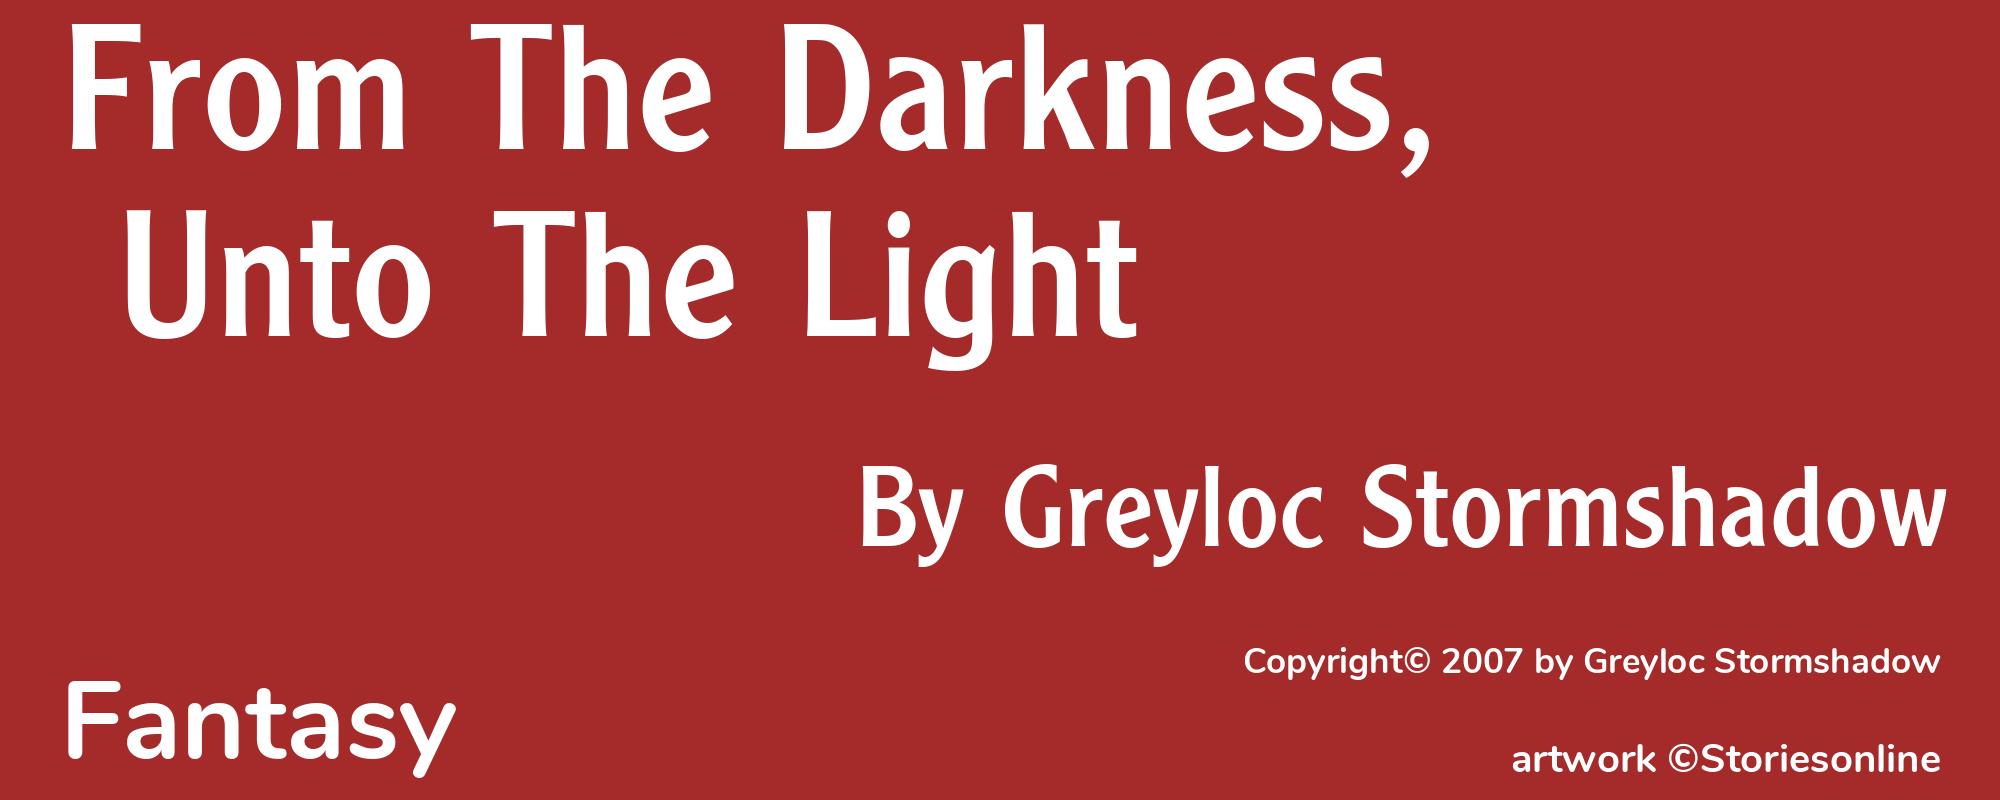 From The Darkness, Unto The Light - Cover